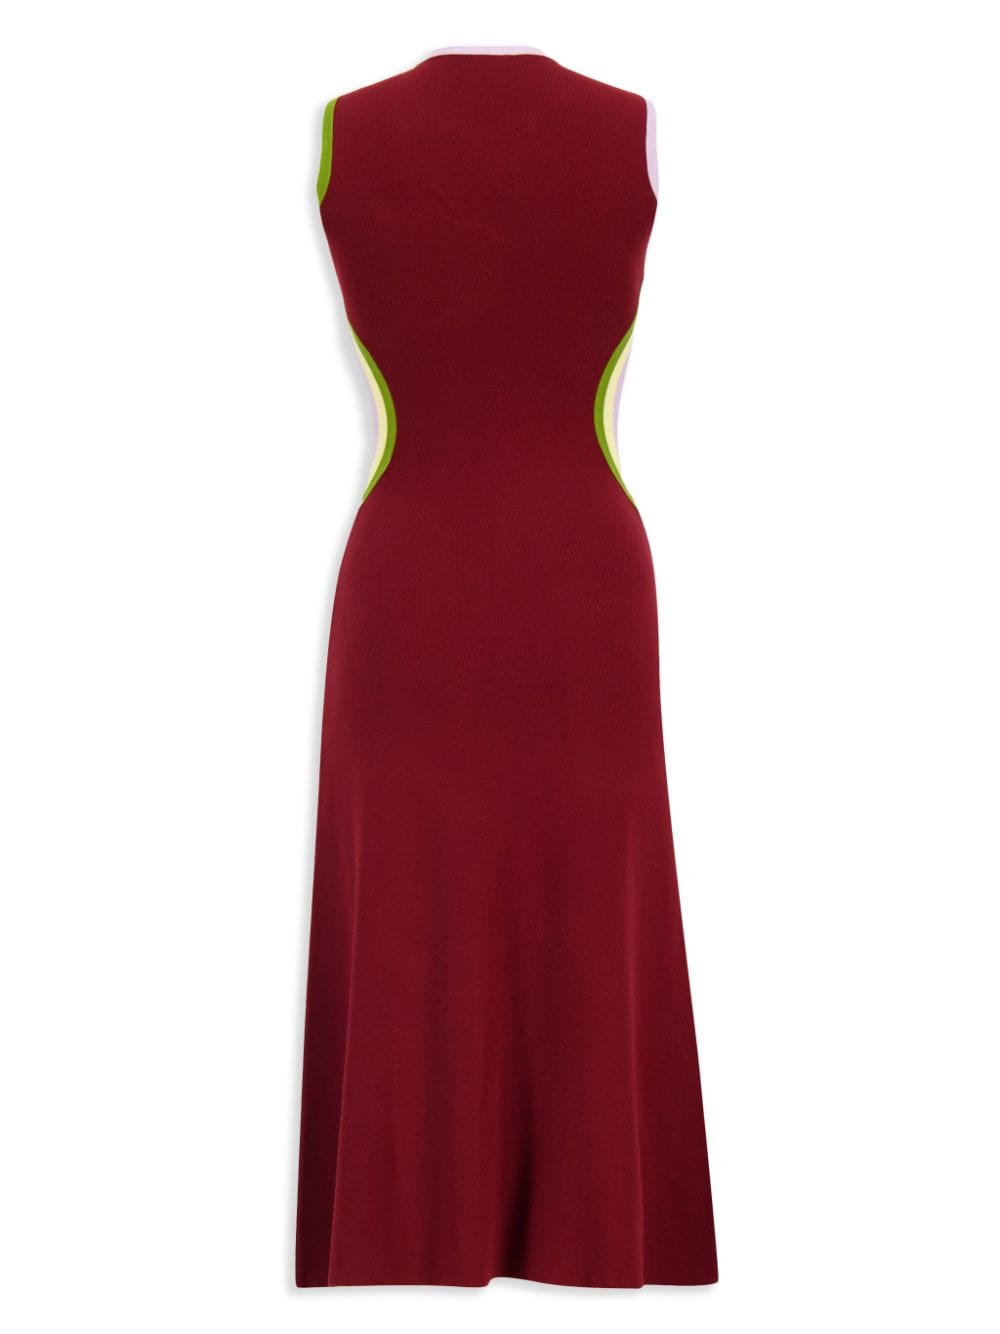 PAULA cut-out knitted dress - Rood